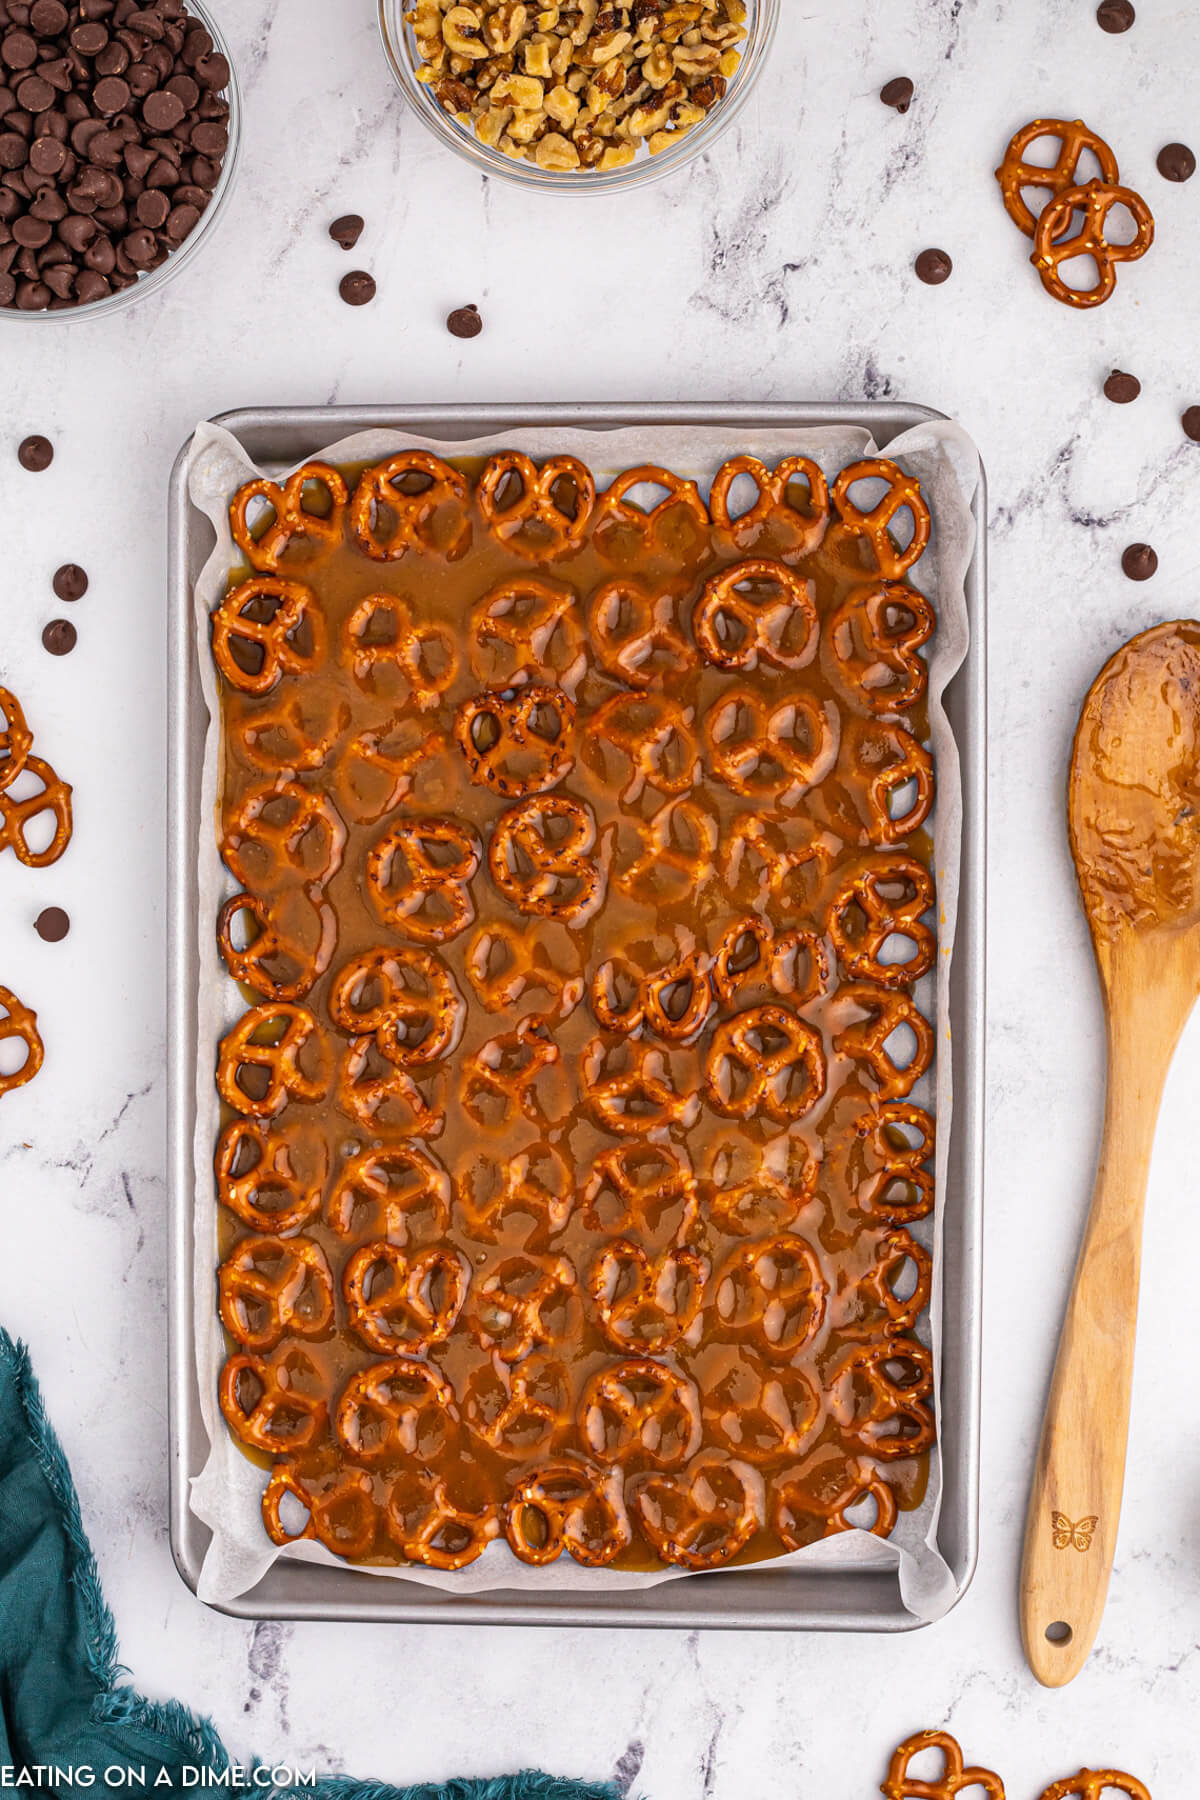 The mixture is poured over the pretzels on a baking sheet